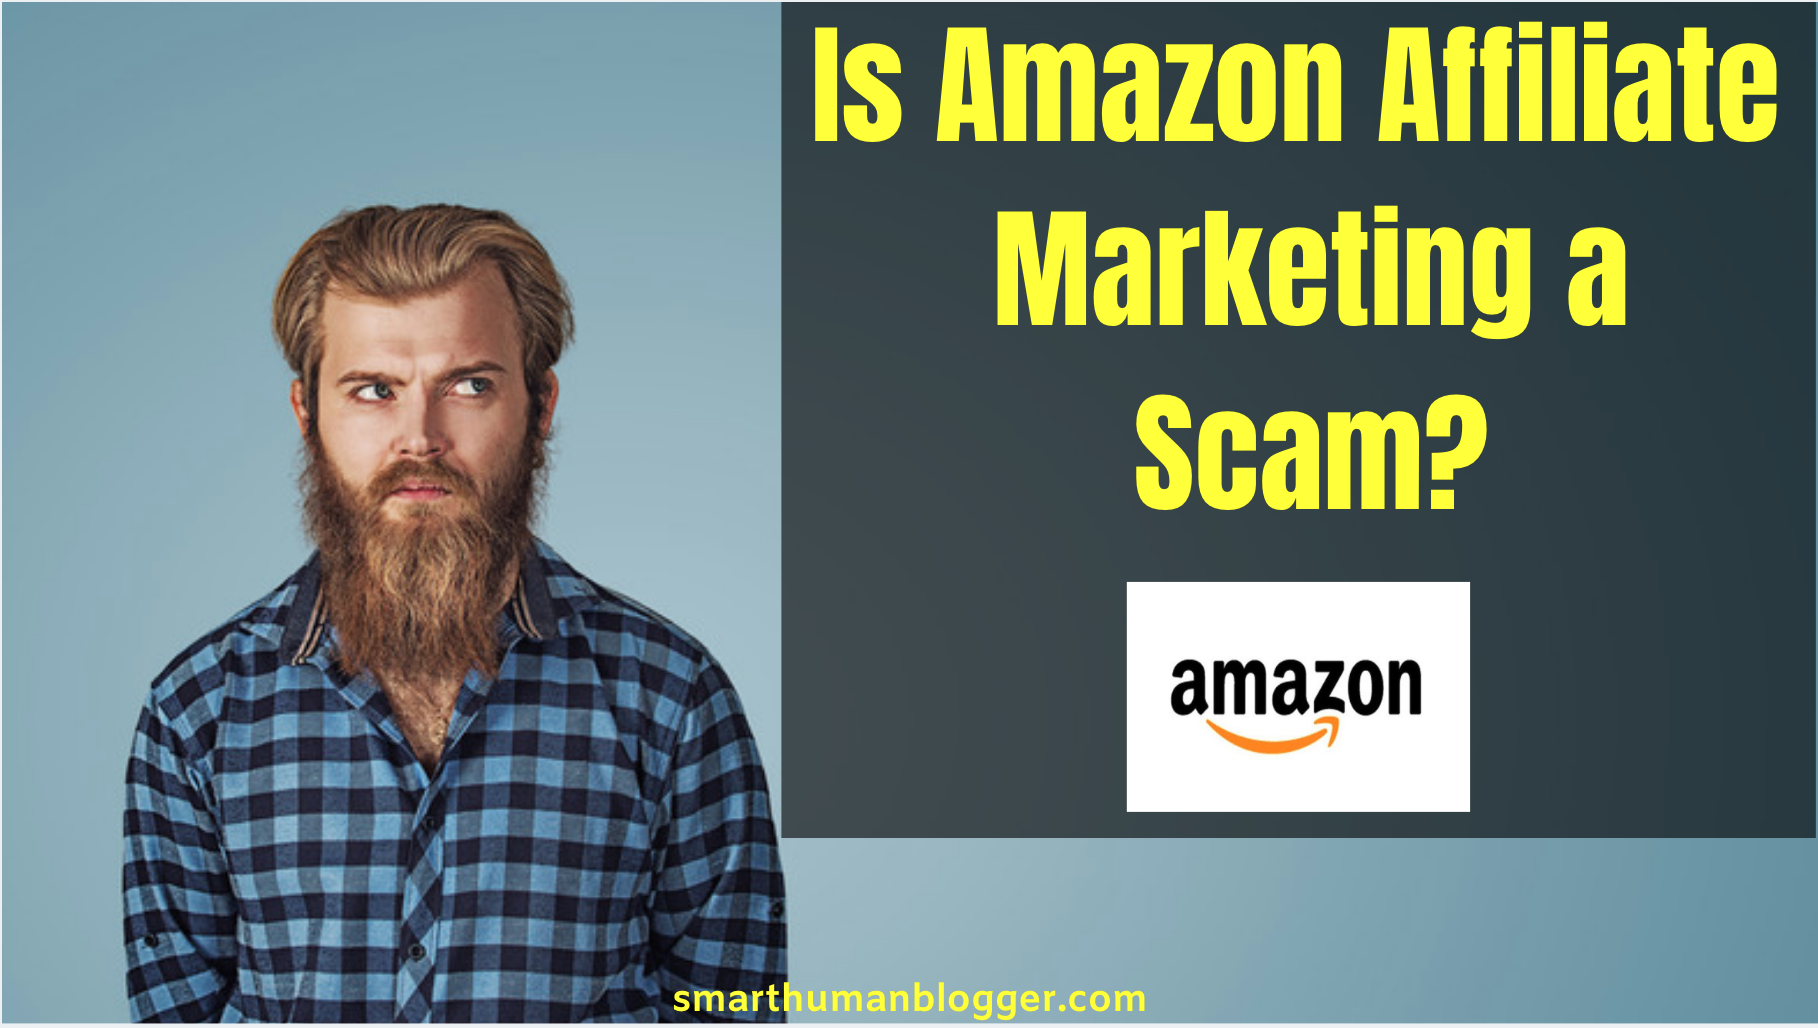 Is Amazon Affiliate Marketing a Scam